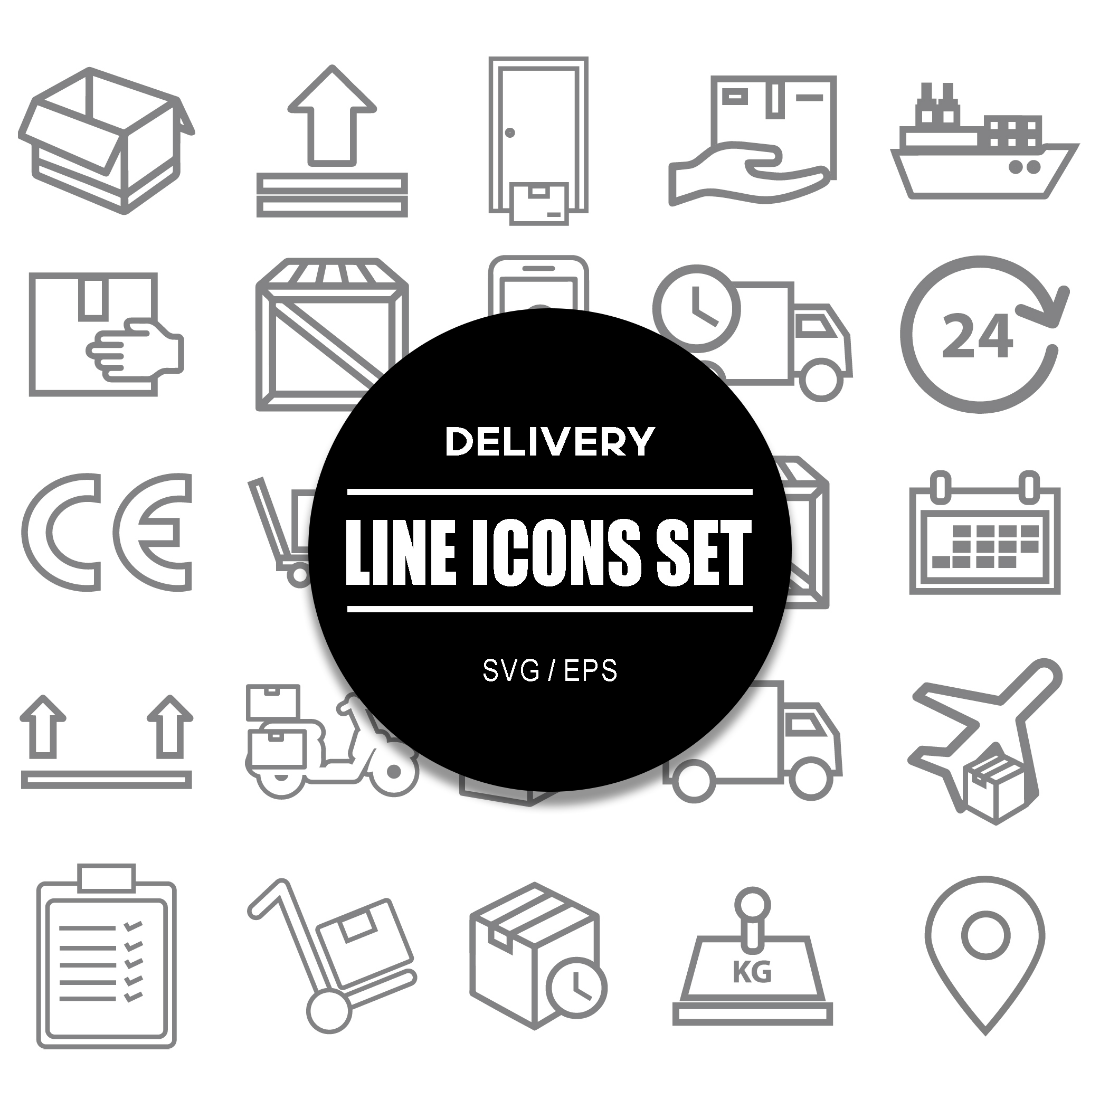 Delivery Icon Set cover image.